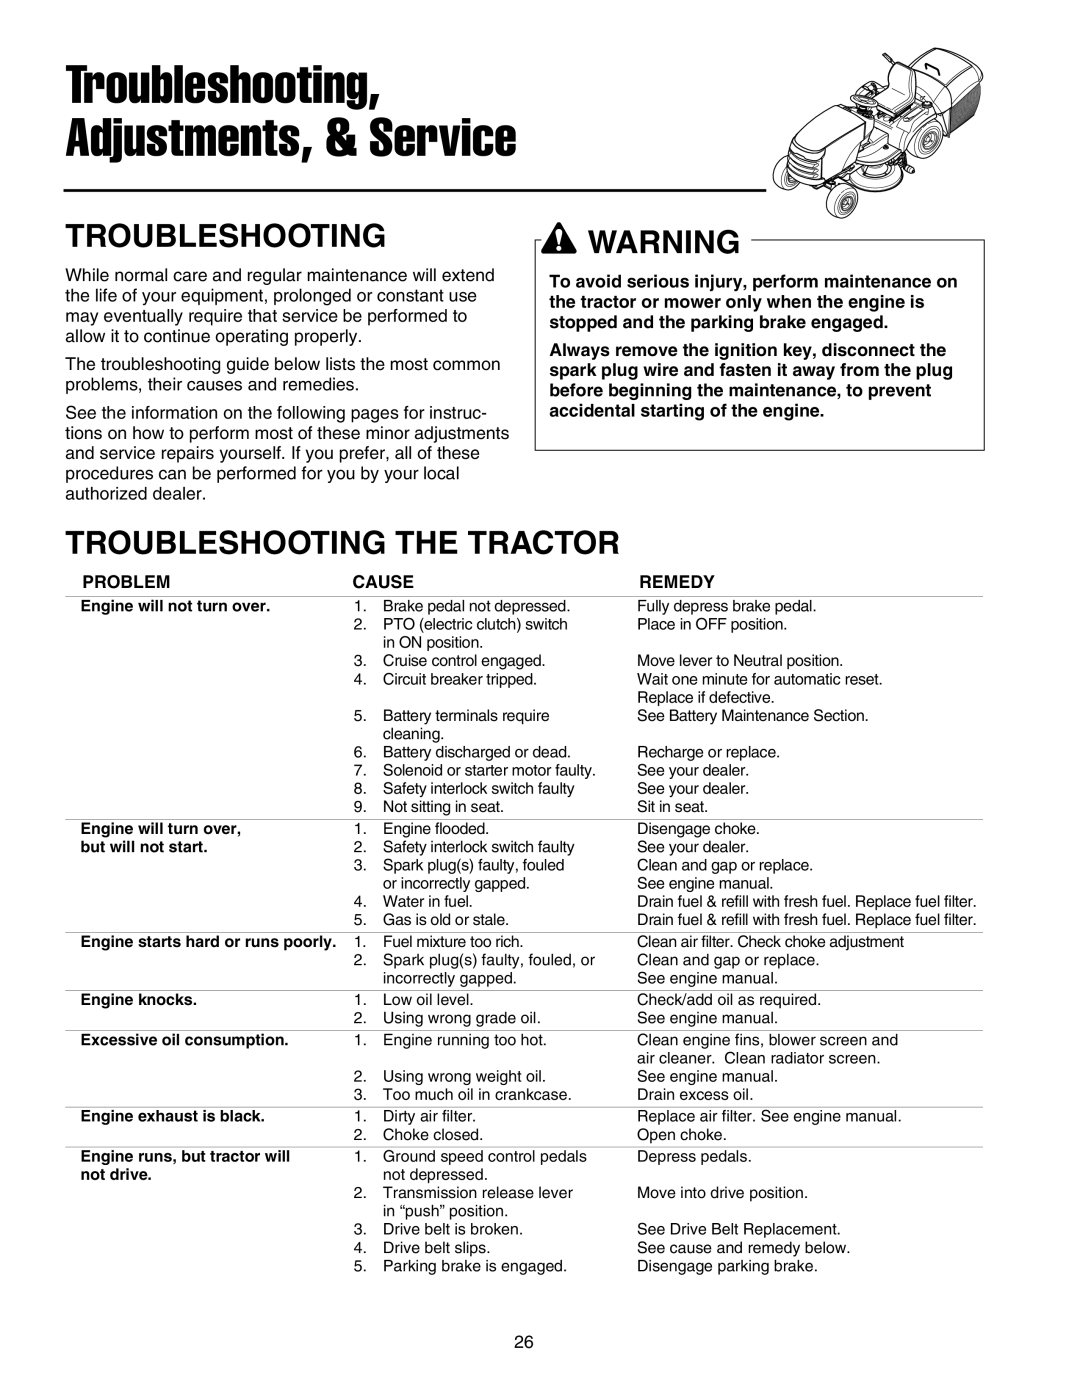 Snapper XL Series manual Troubleshooting, Adjustments, & Service, Troubleshooting The Tractor 